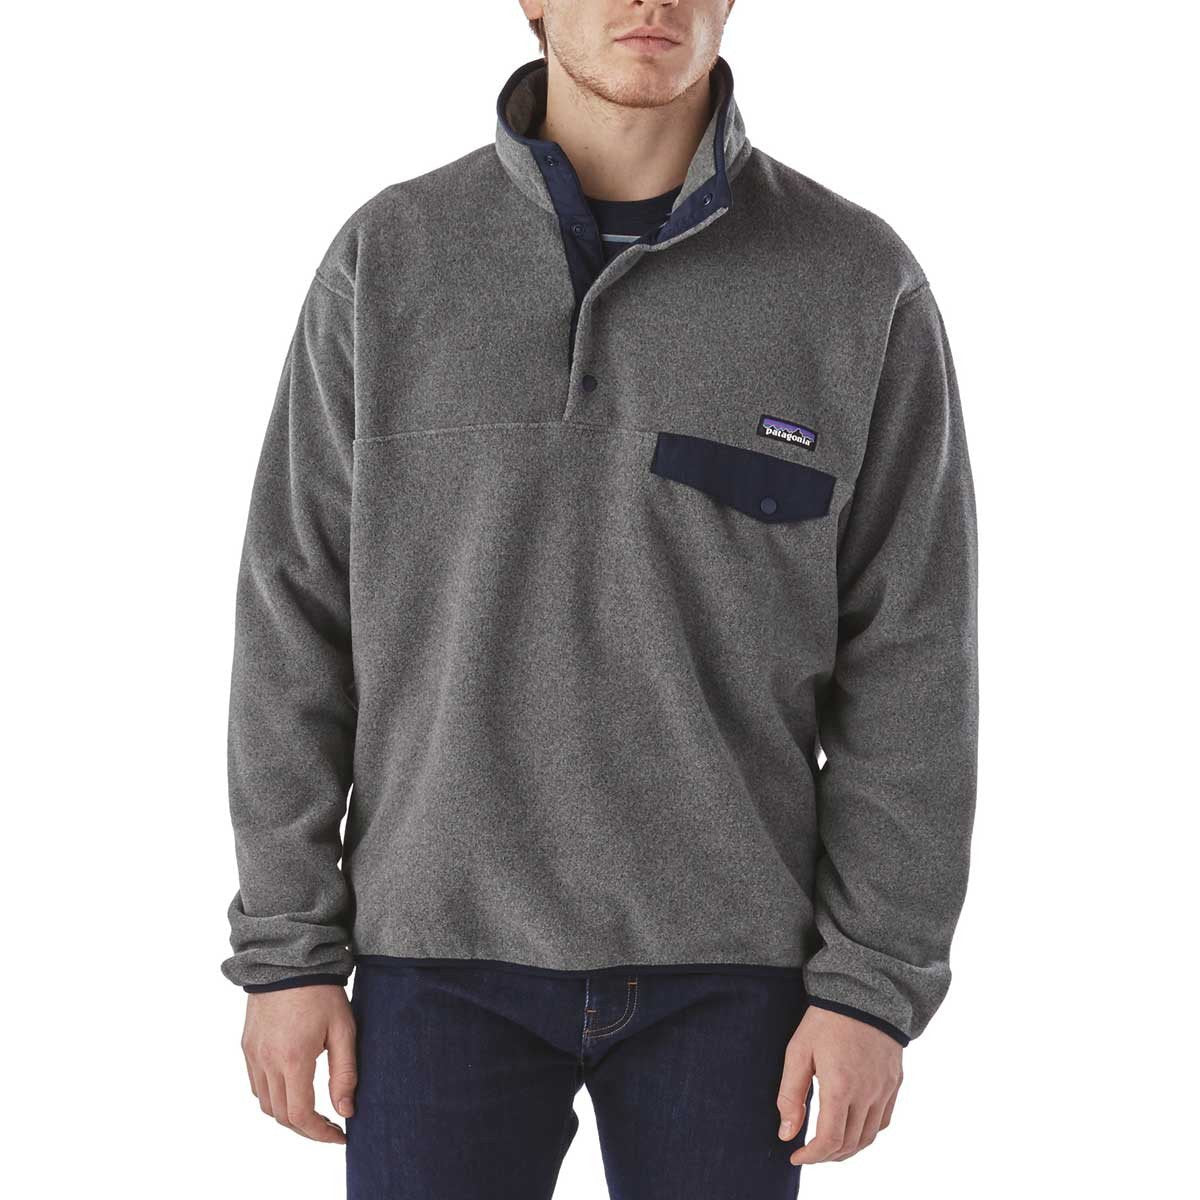 Patagonia Synchilla Snap-T Pullover Fleece - Oatmeal Heather Beige